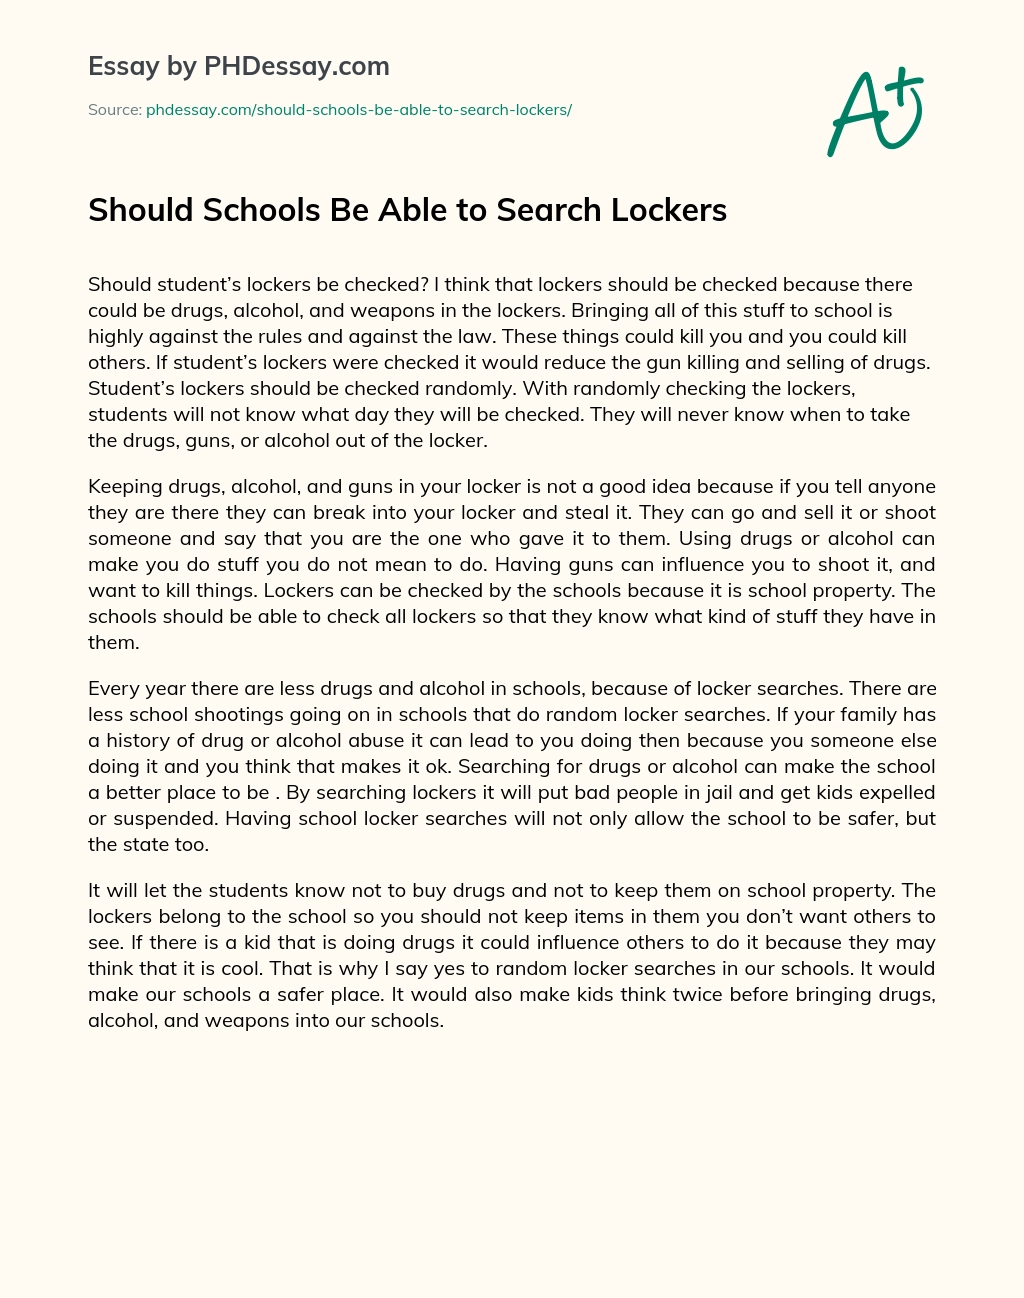 Should Schools Be Able to Search Lockers essay